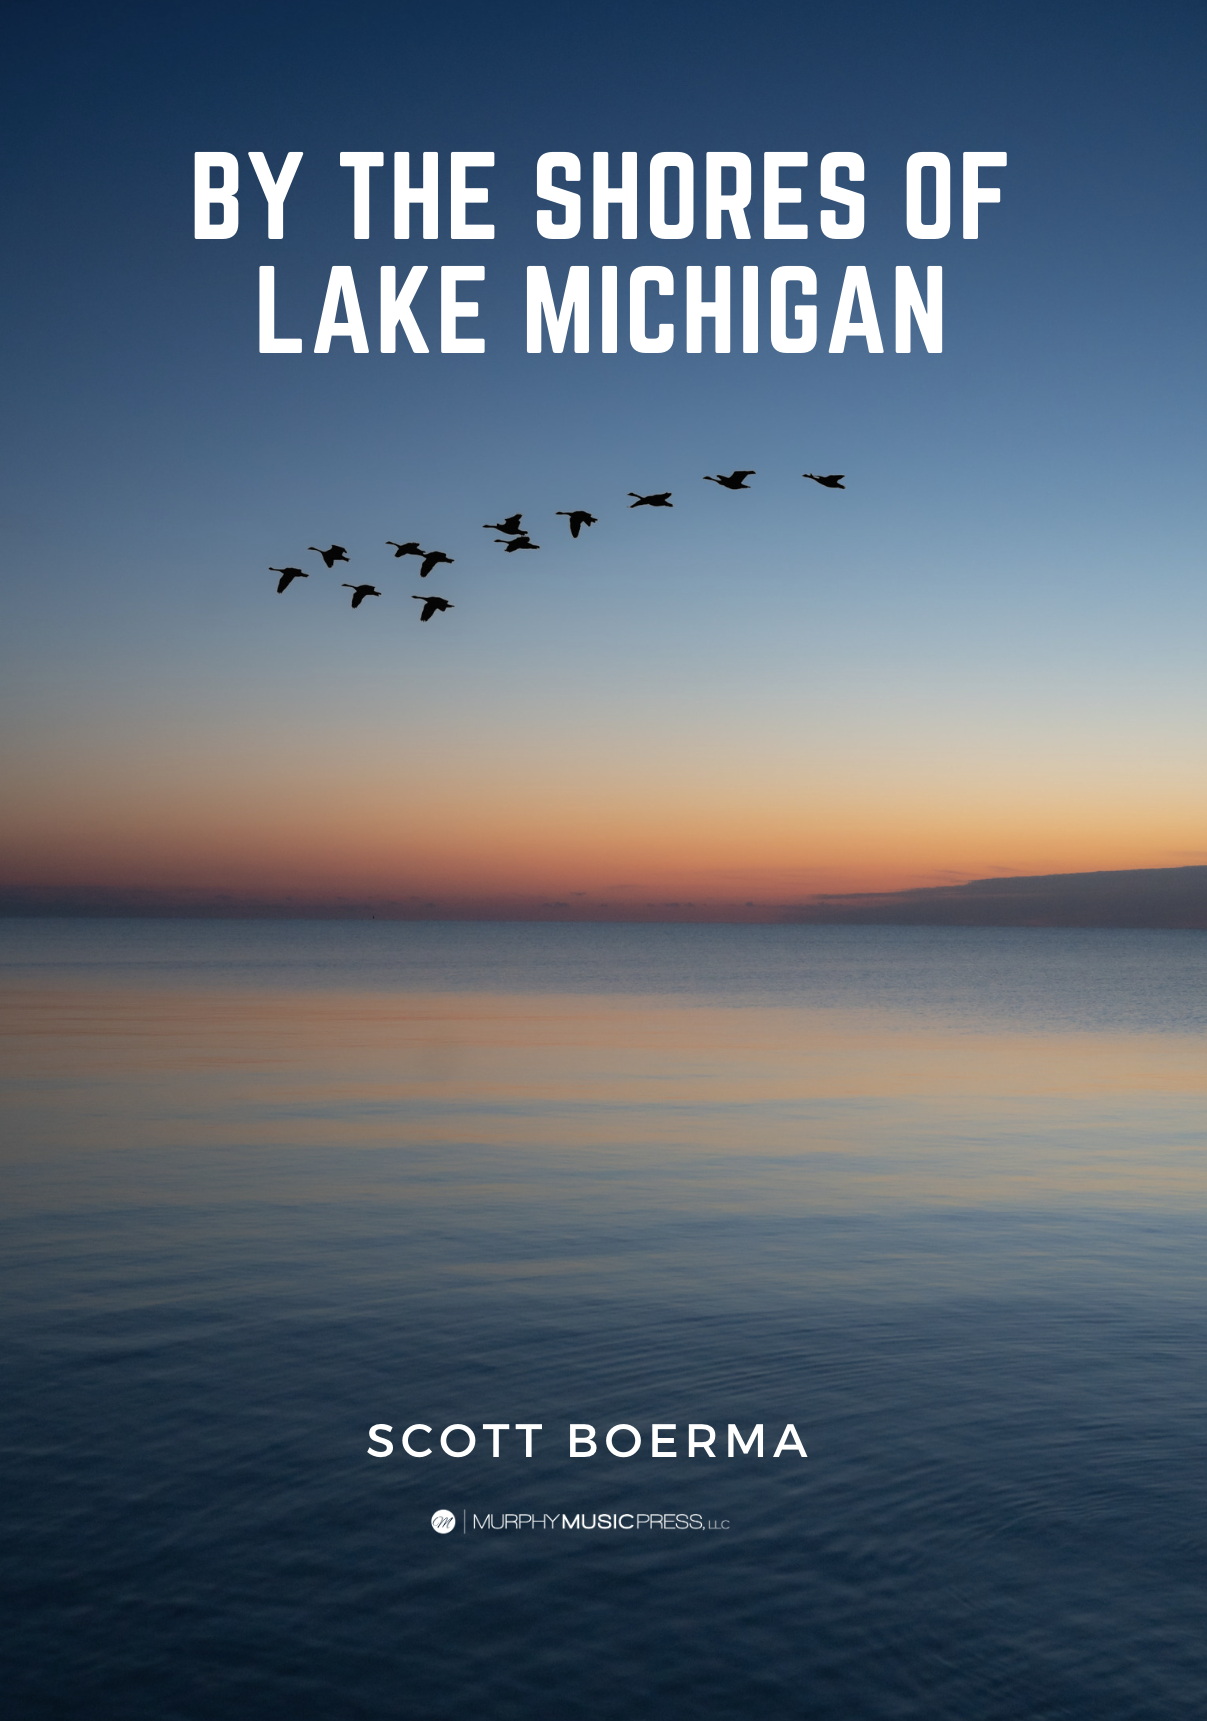 By The Shores Of Lake Michigan by Scott Boerma